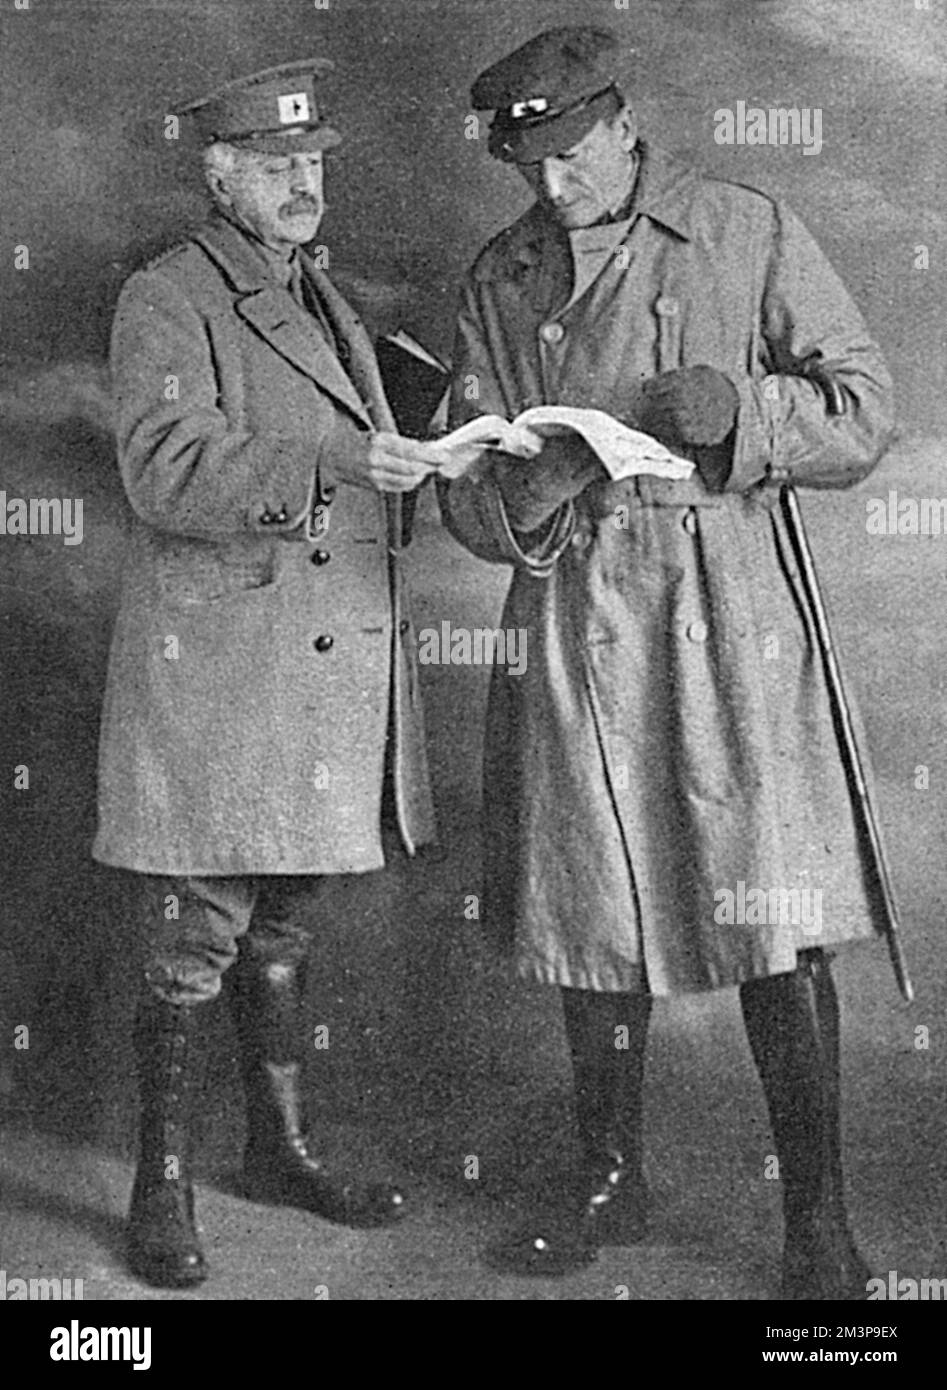 Algernon Henry Blackwood (1869-1951), English author and playwright, particularly known for his supernatural fiction and ghost stories, pictured here on the right with the Punch artist and comic illustrator, Alfred Taylor.  The Tatler reports that Blackwood was working with the Red Cross at Rouen as a searcher for missing men.  The Oxford Dictionary of National Biography does not mention this episode in Blackwood's life, but does note that he worked for British intelligence as an undercover agent in Switzerland during some of the war.     Date: 1918 Stock Photo